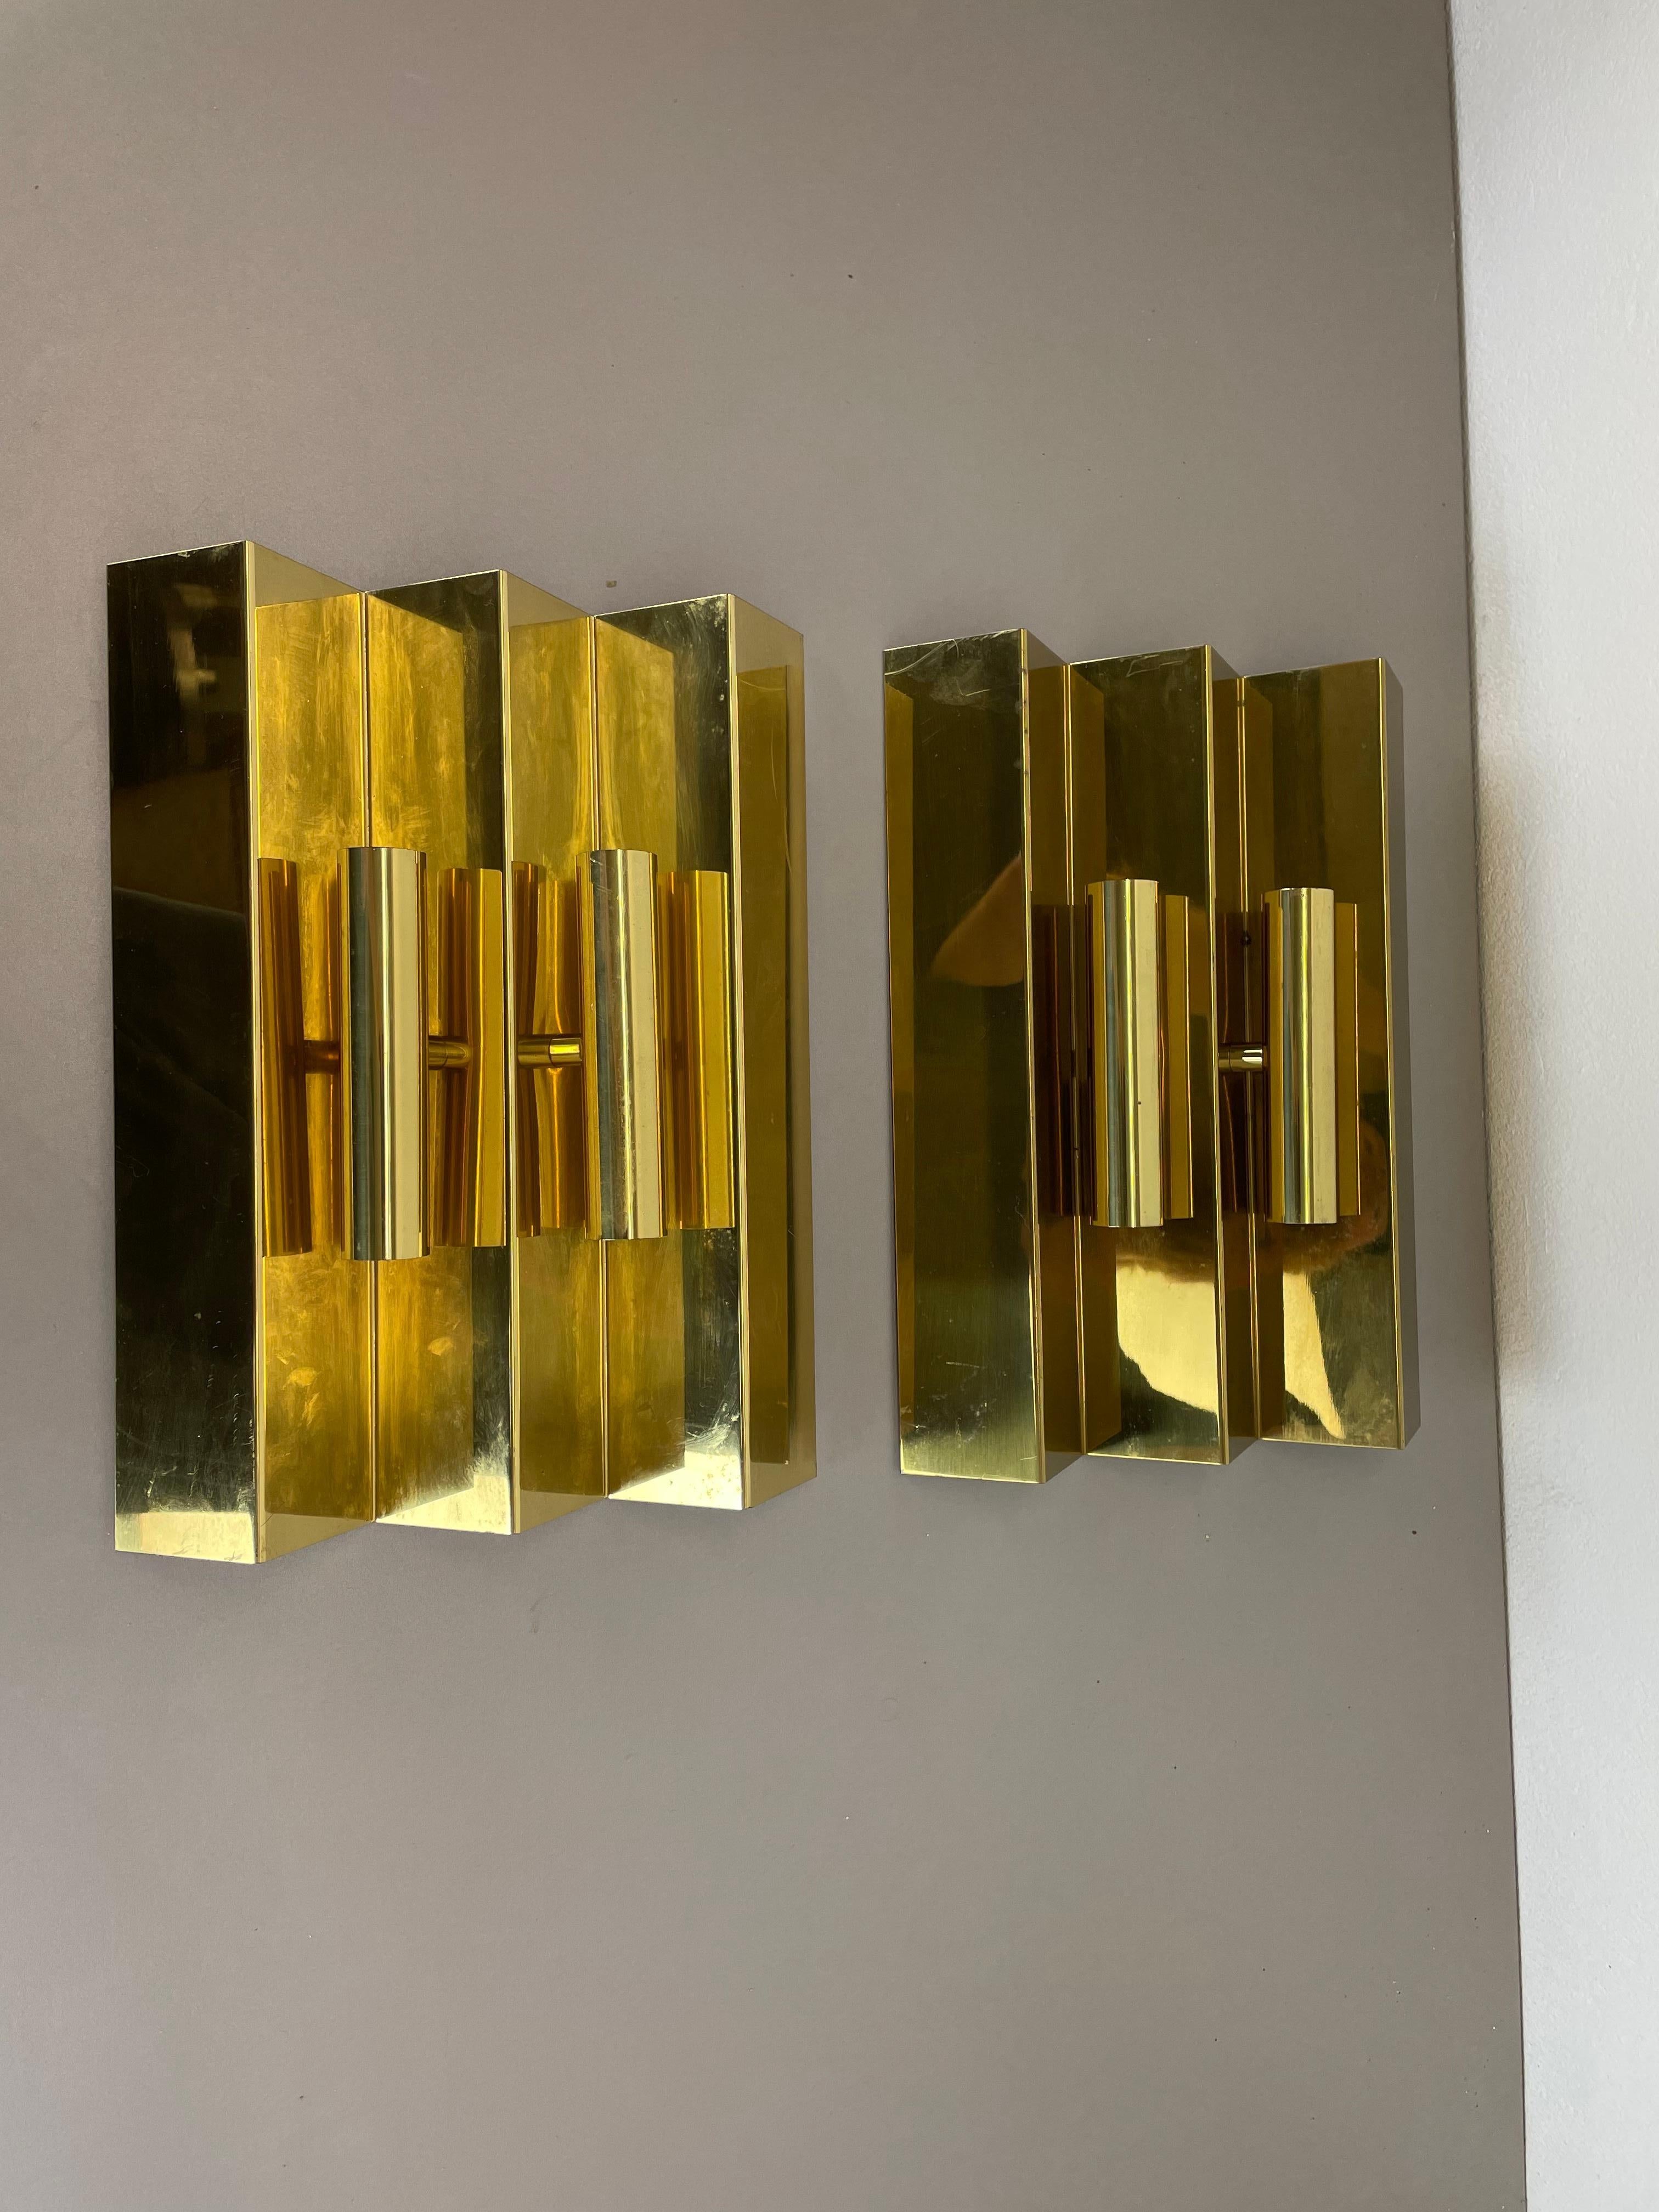 Set of 2 solid Brass Stilnovo Style Wall Light By WKR Leuchten, Germany 1970s In Good Condition For Sale In Kirchlengern, DE